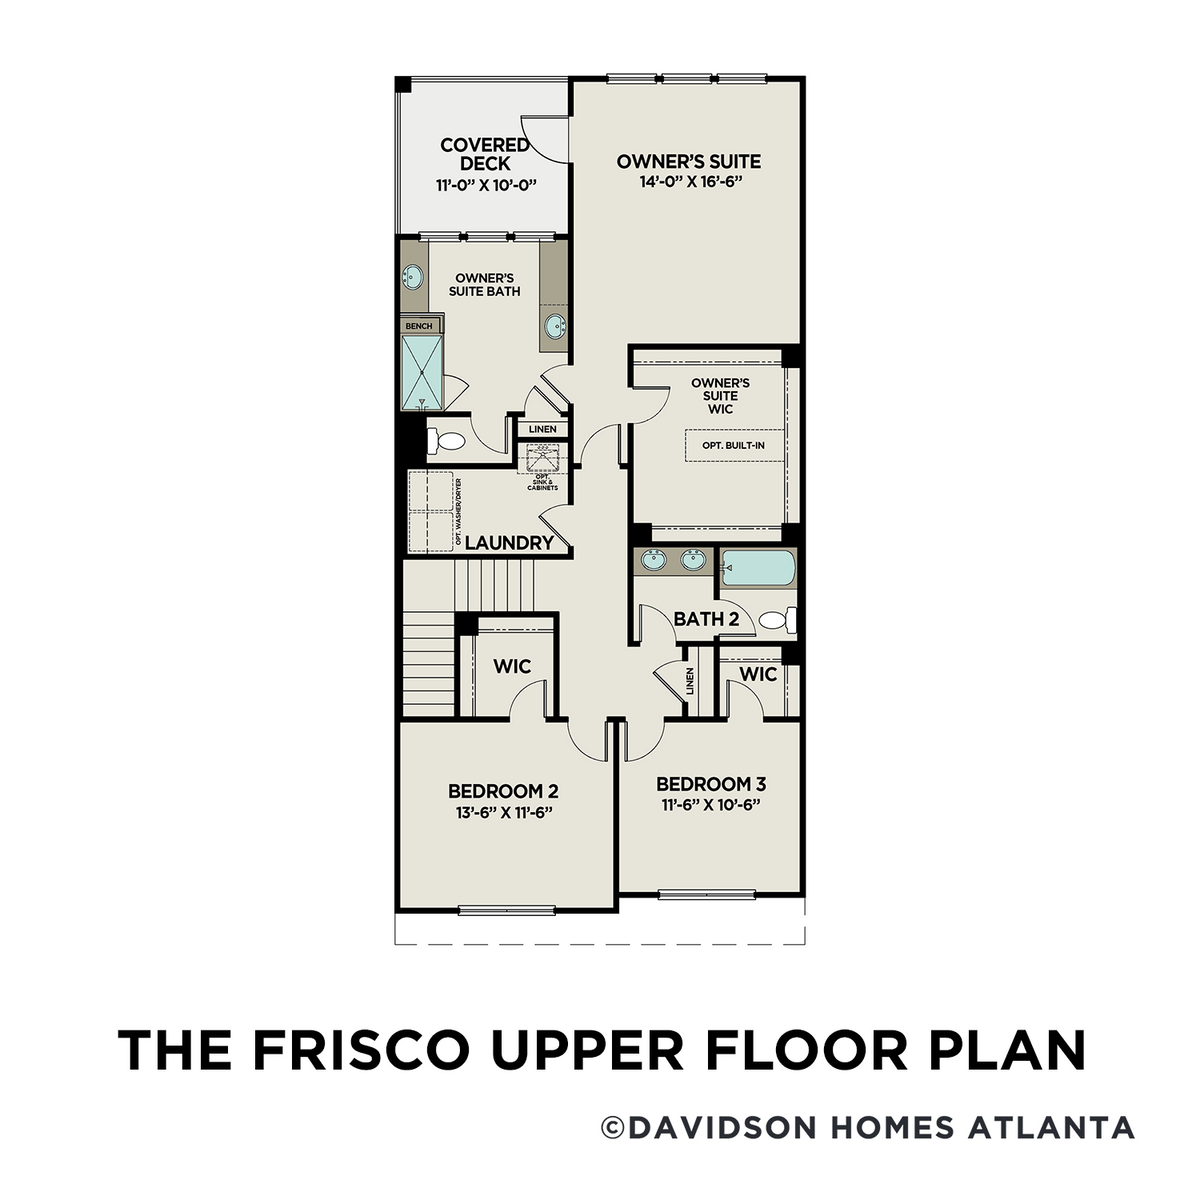 2 - The Frisco B floor plan layout for 114 Batten Board Way in Davidson Homes' The Village at Towne Lake community.